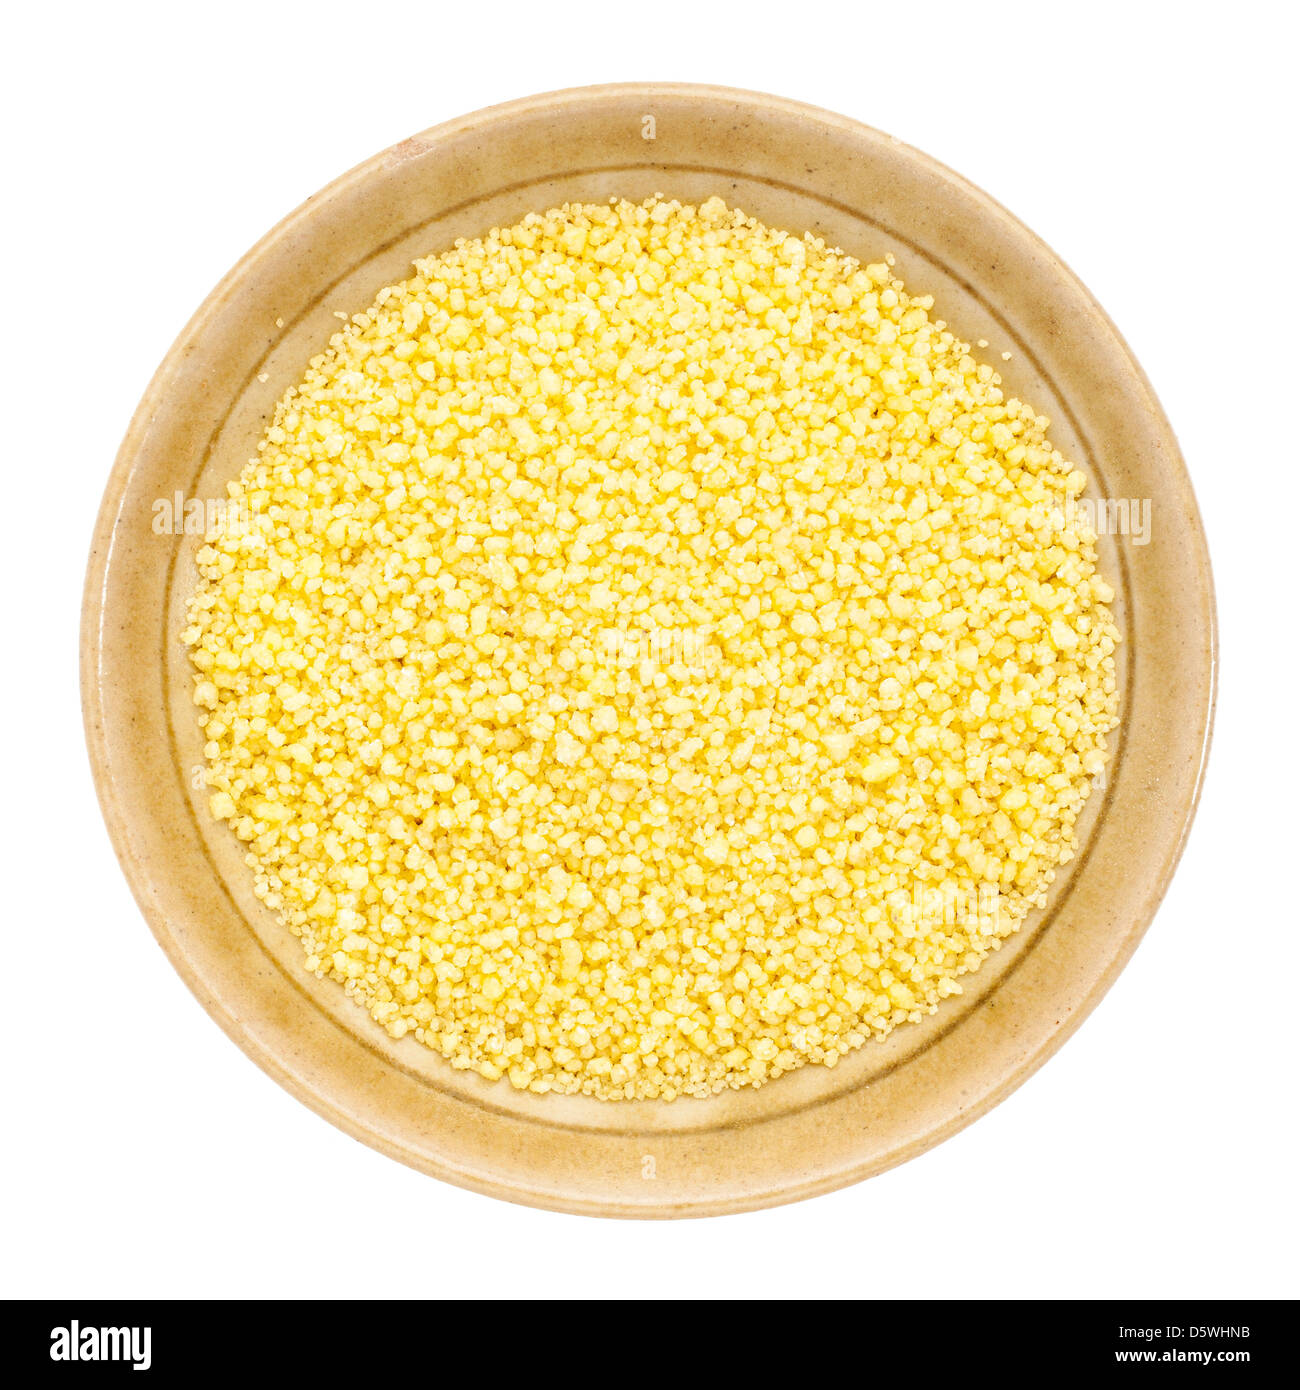 wheat couscous in a small ceramic bowl isolated on white, top view Stock Photo